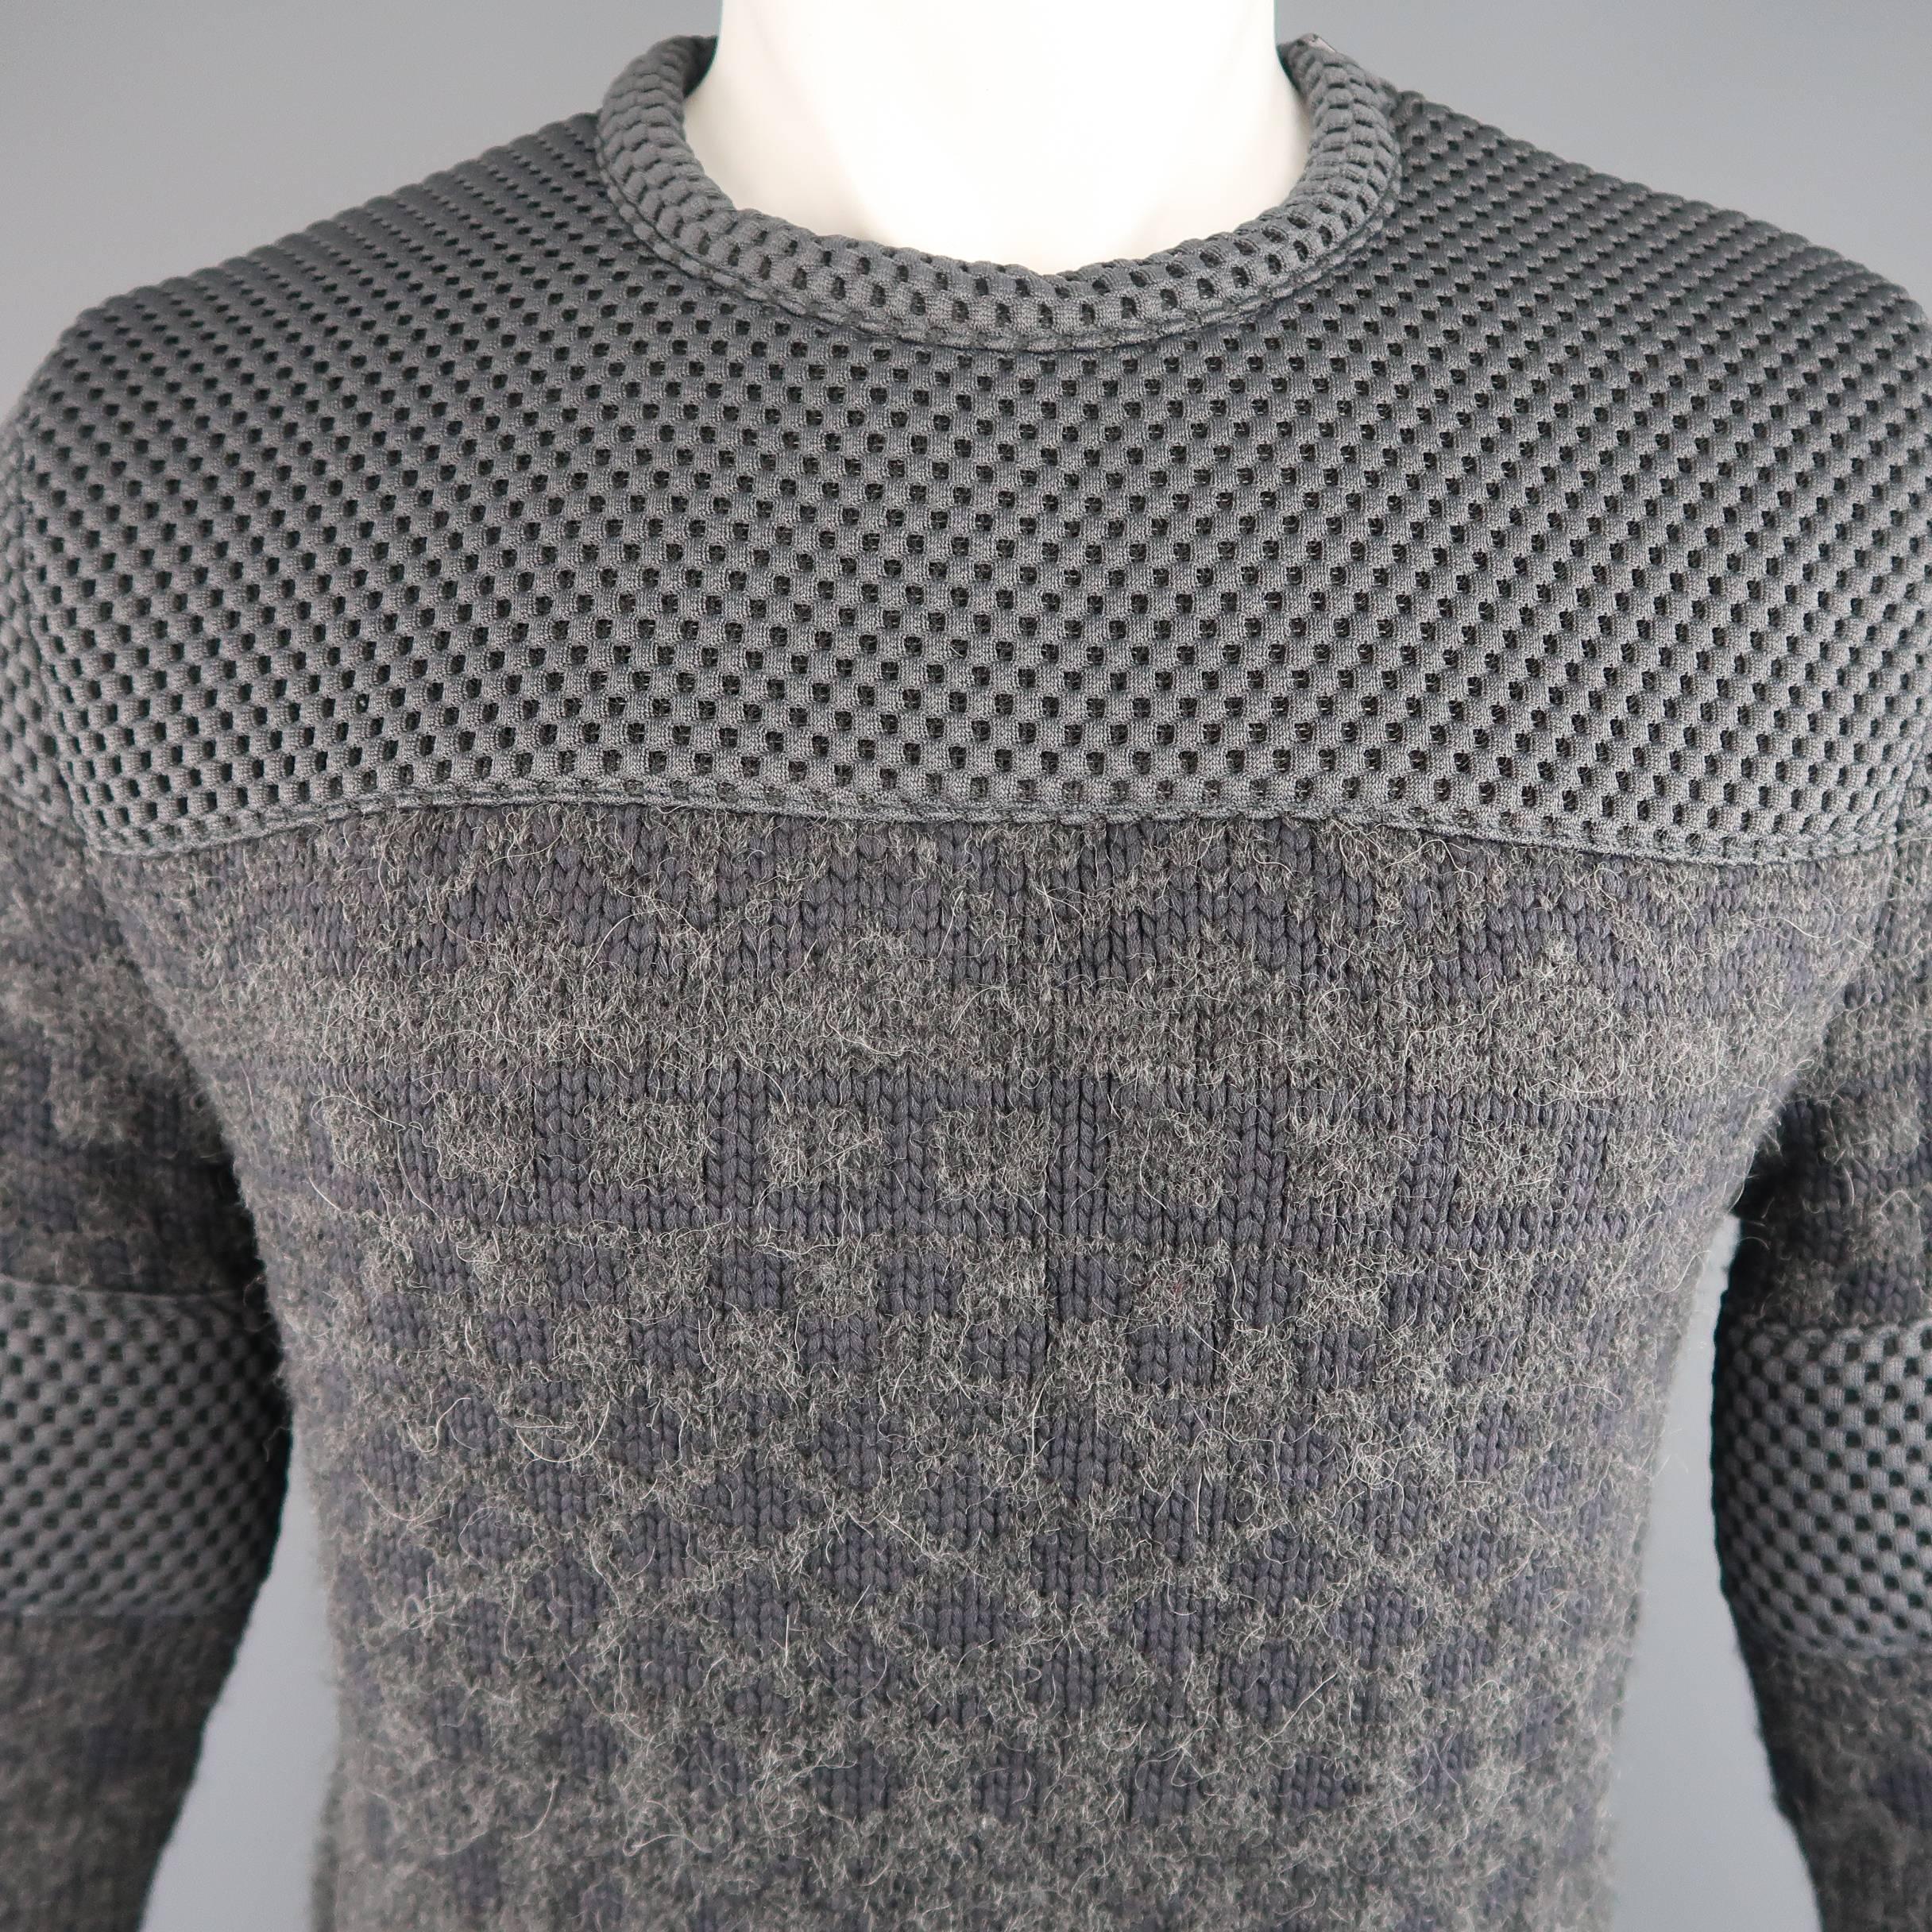 CALVIN KLEIN COLLECTION pullover sweater comes in a dark gray alpaca blend knit and features a round crewneck with shoulder zip, patterned mid section, and gray mesh panels. Fall 2015 Collection. Made in Italy.
 
Excellent Pre-Owned